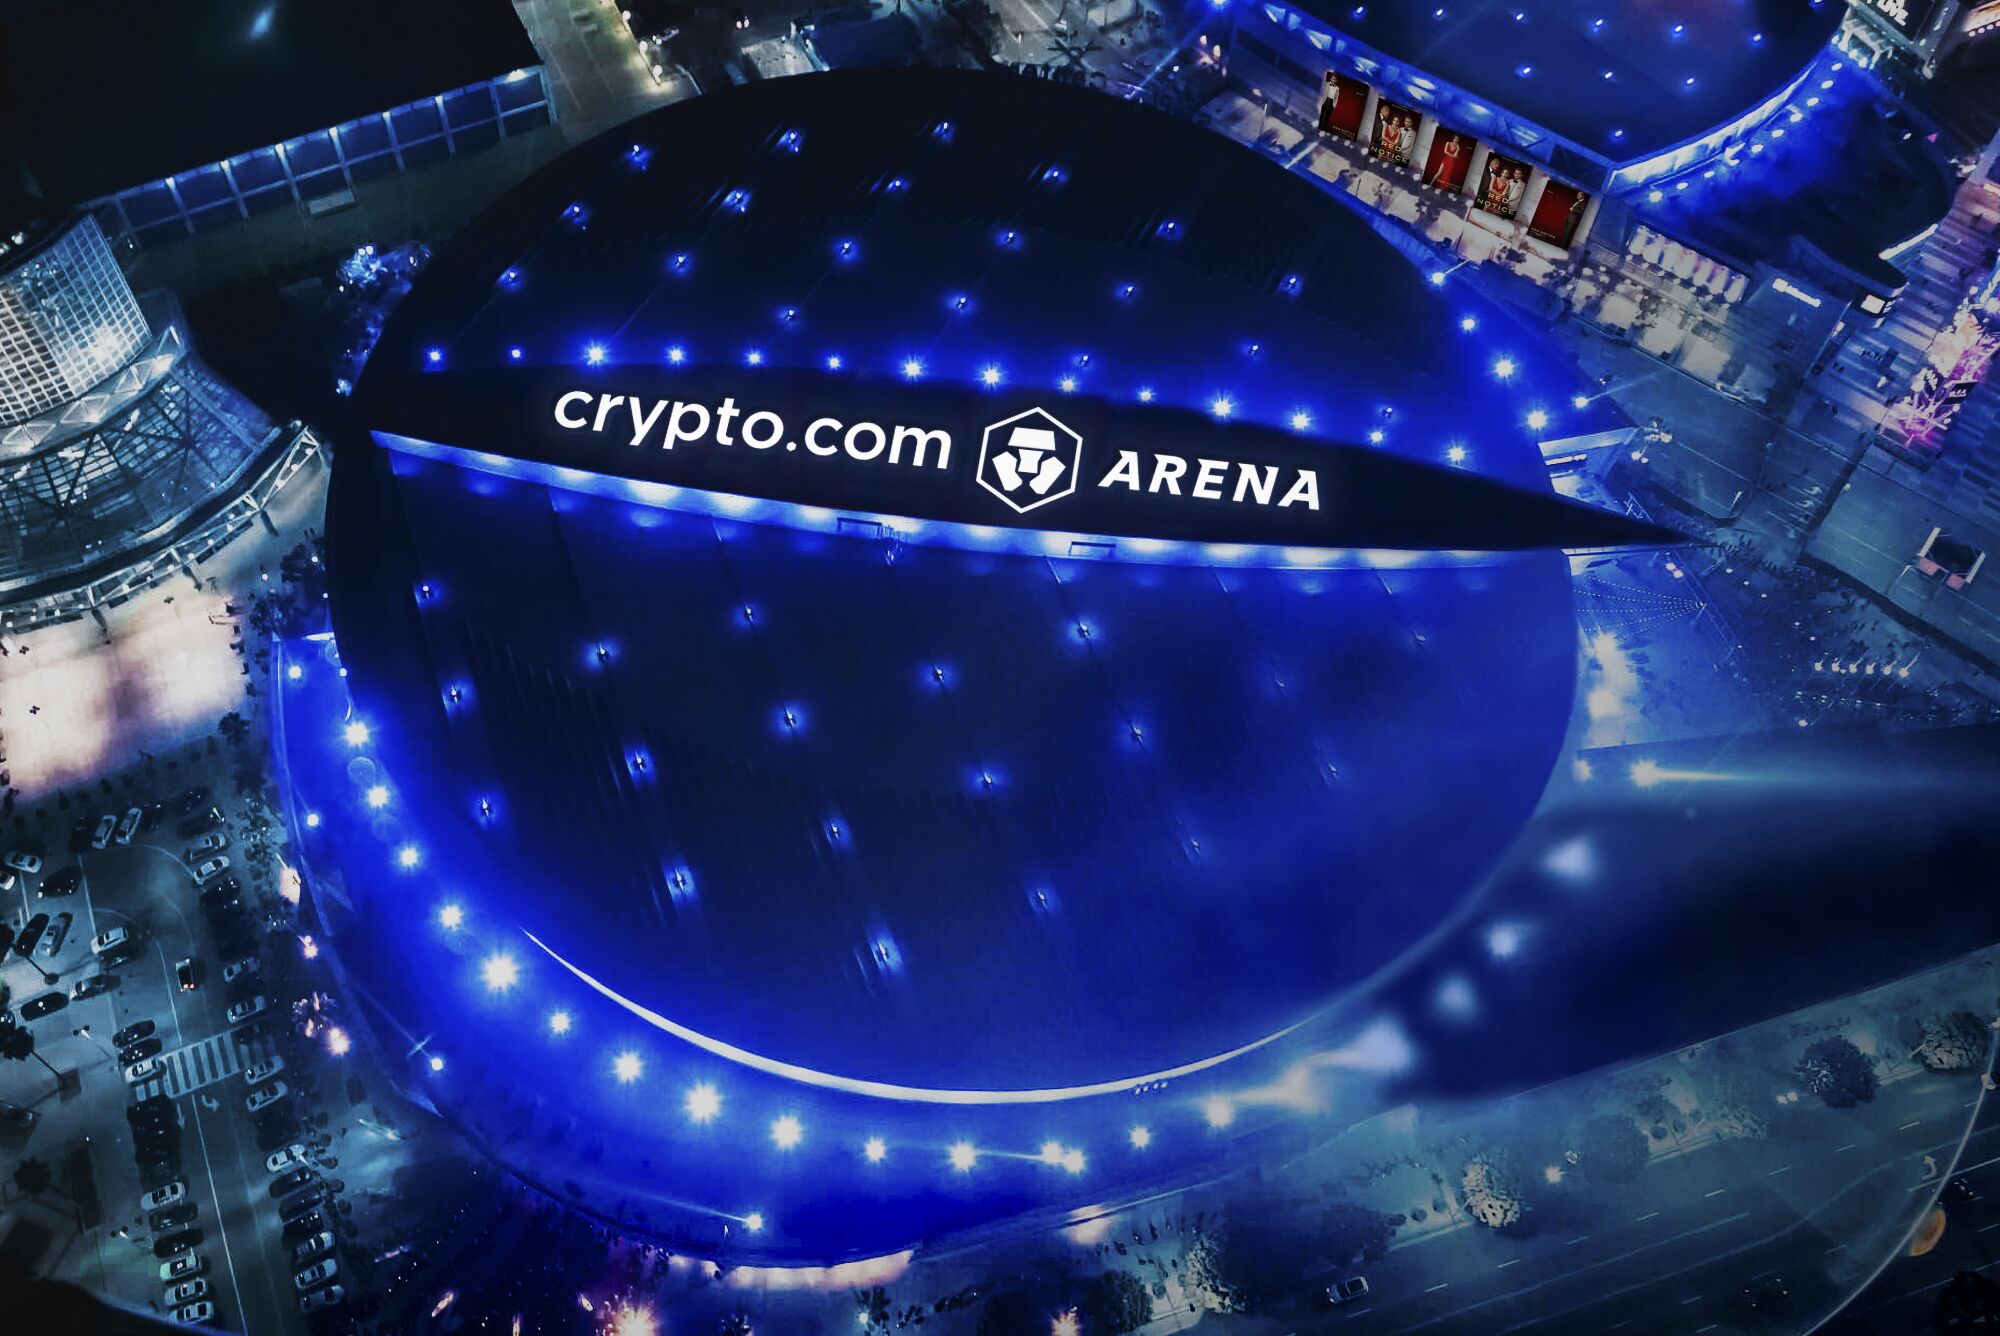 A rendering of Crypto.com Arena